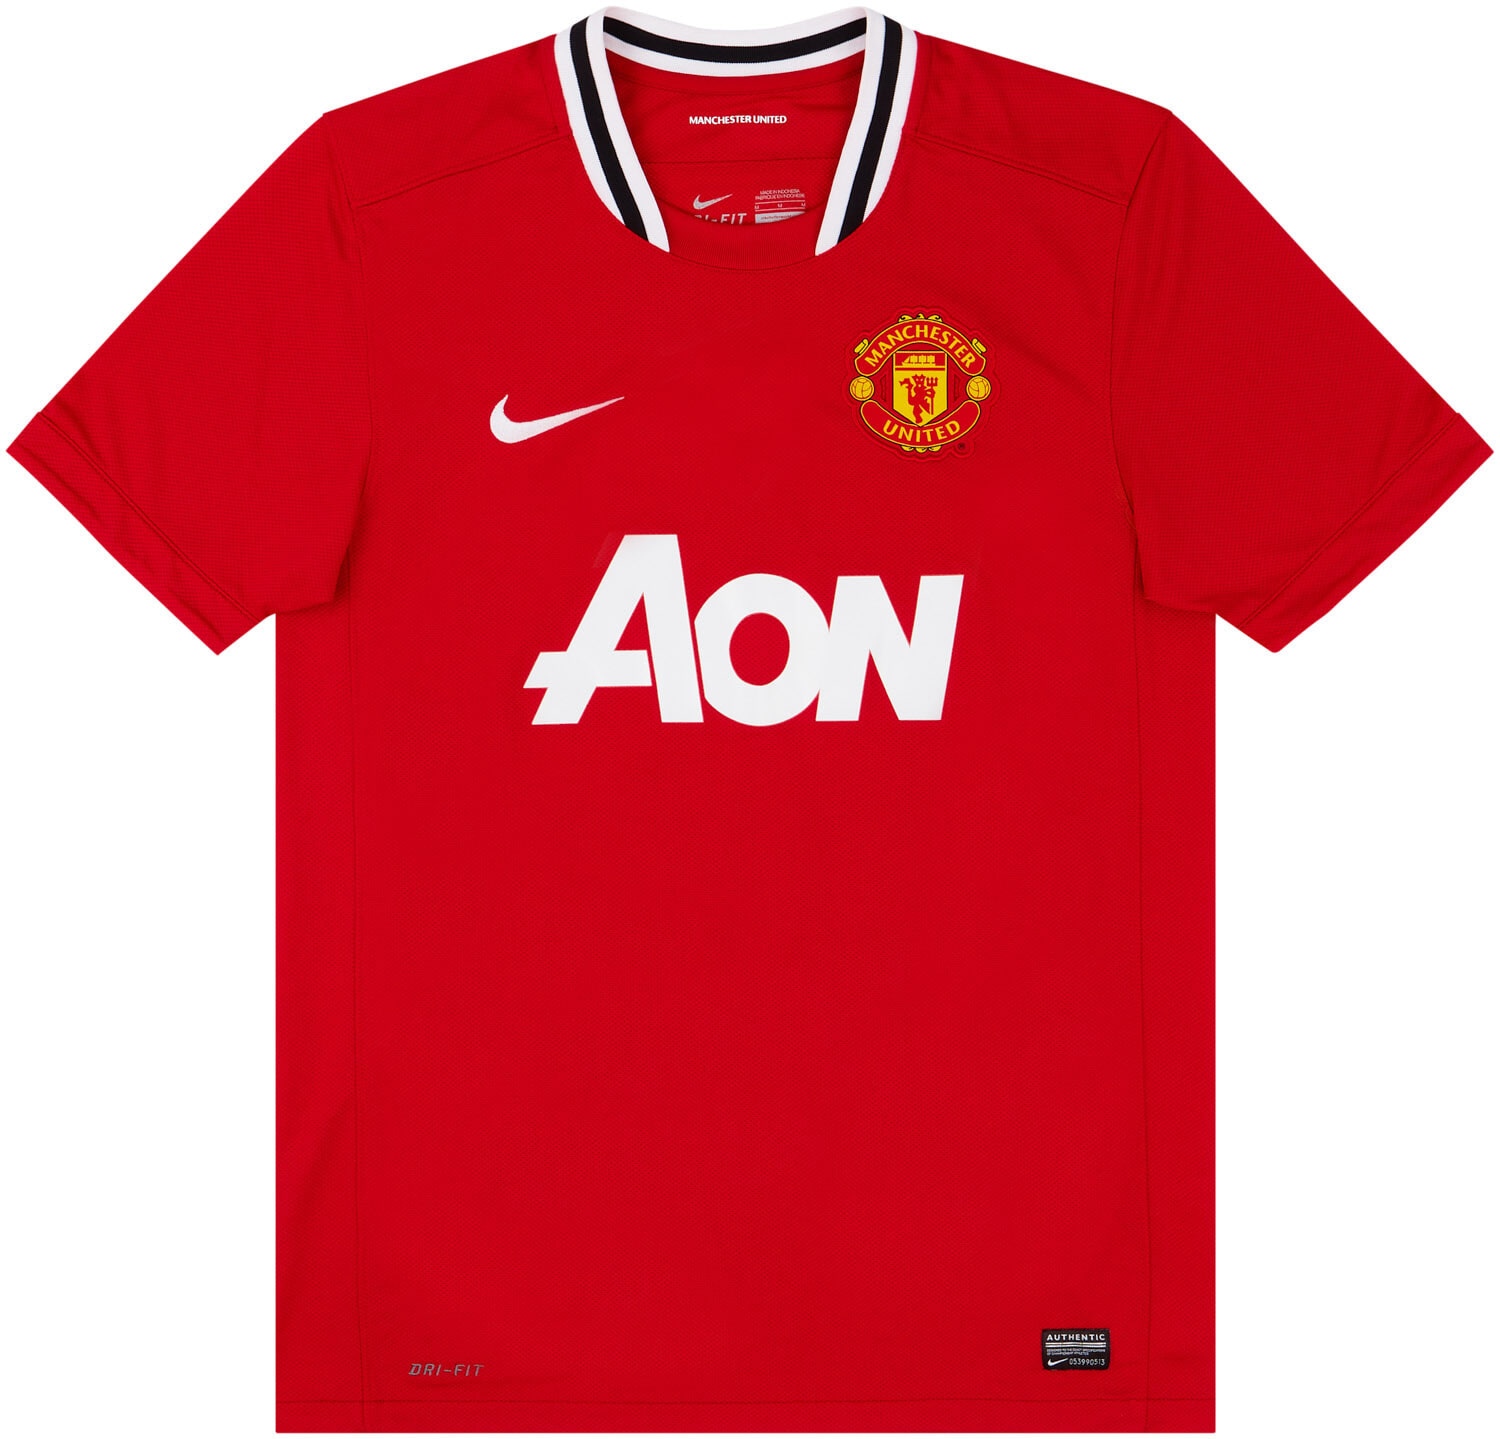 2011-12 Manchester United Home Shirt - 8/10 - ()